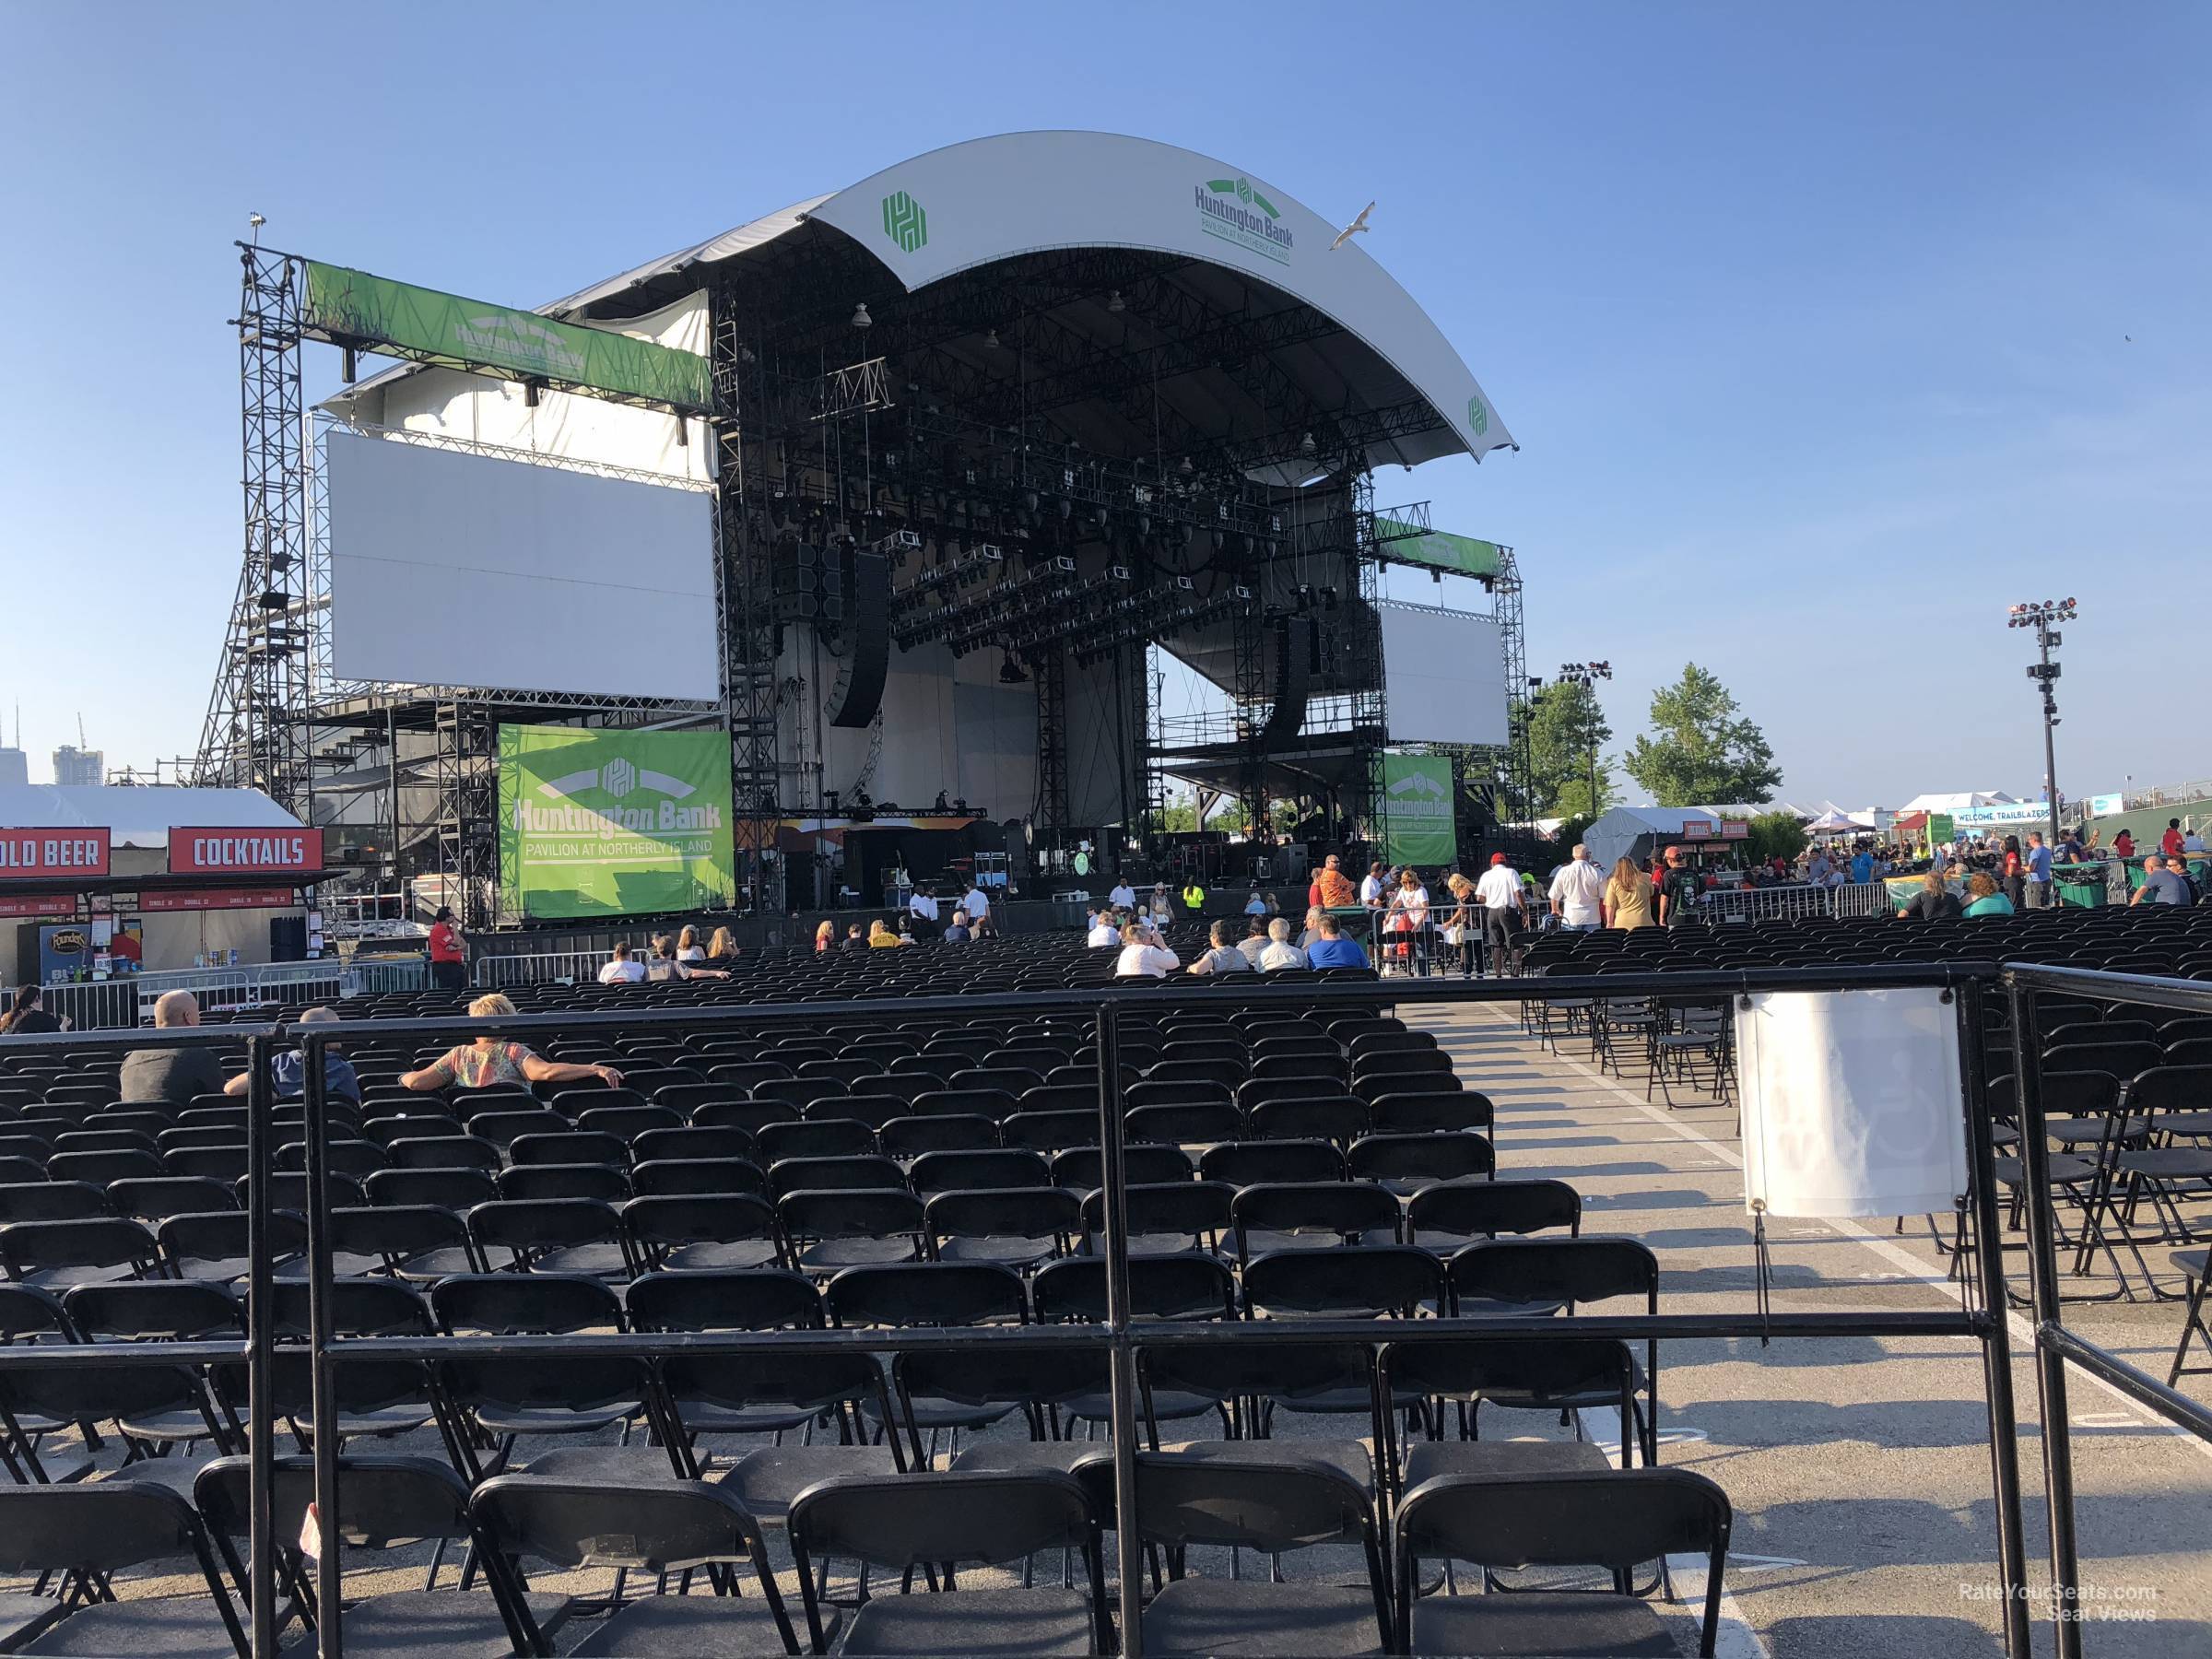 section 207, row ada seat view  - huntington bank pavilion (at northerly island)